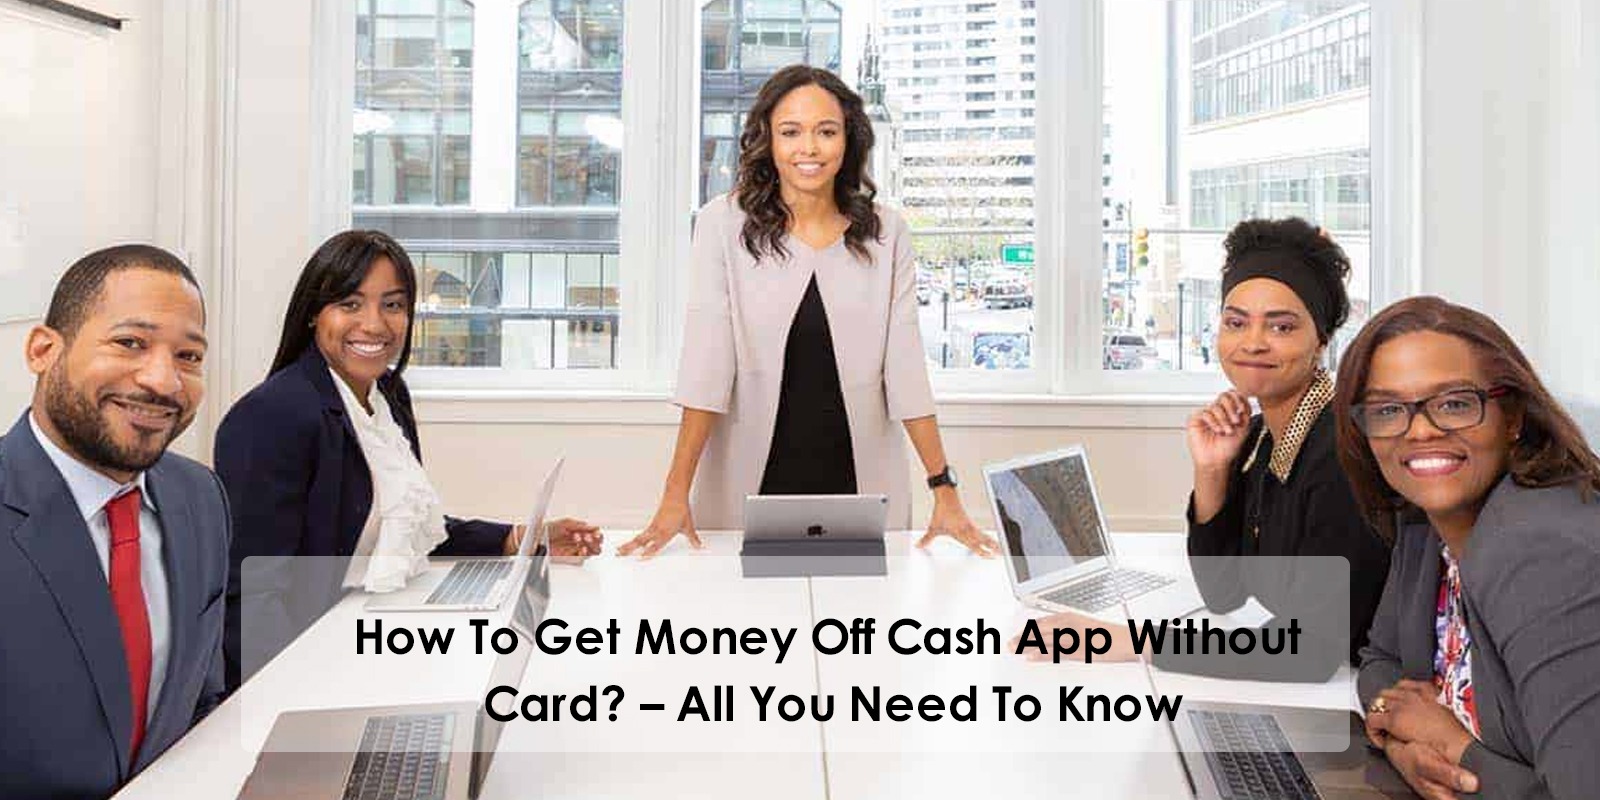 How To Get Money Off Cash App Without Card? – All You Need To Know